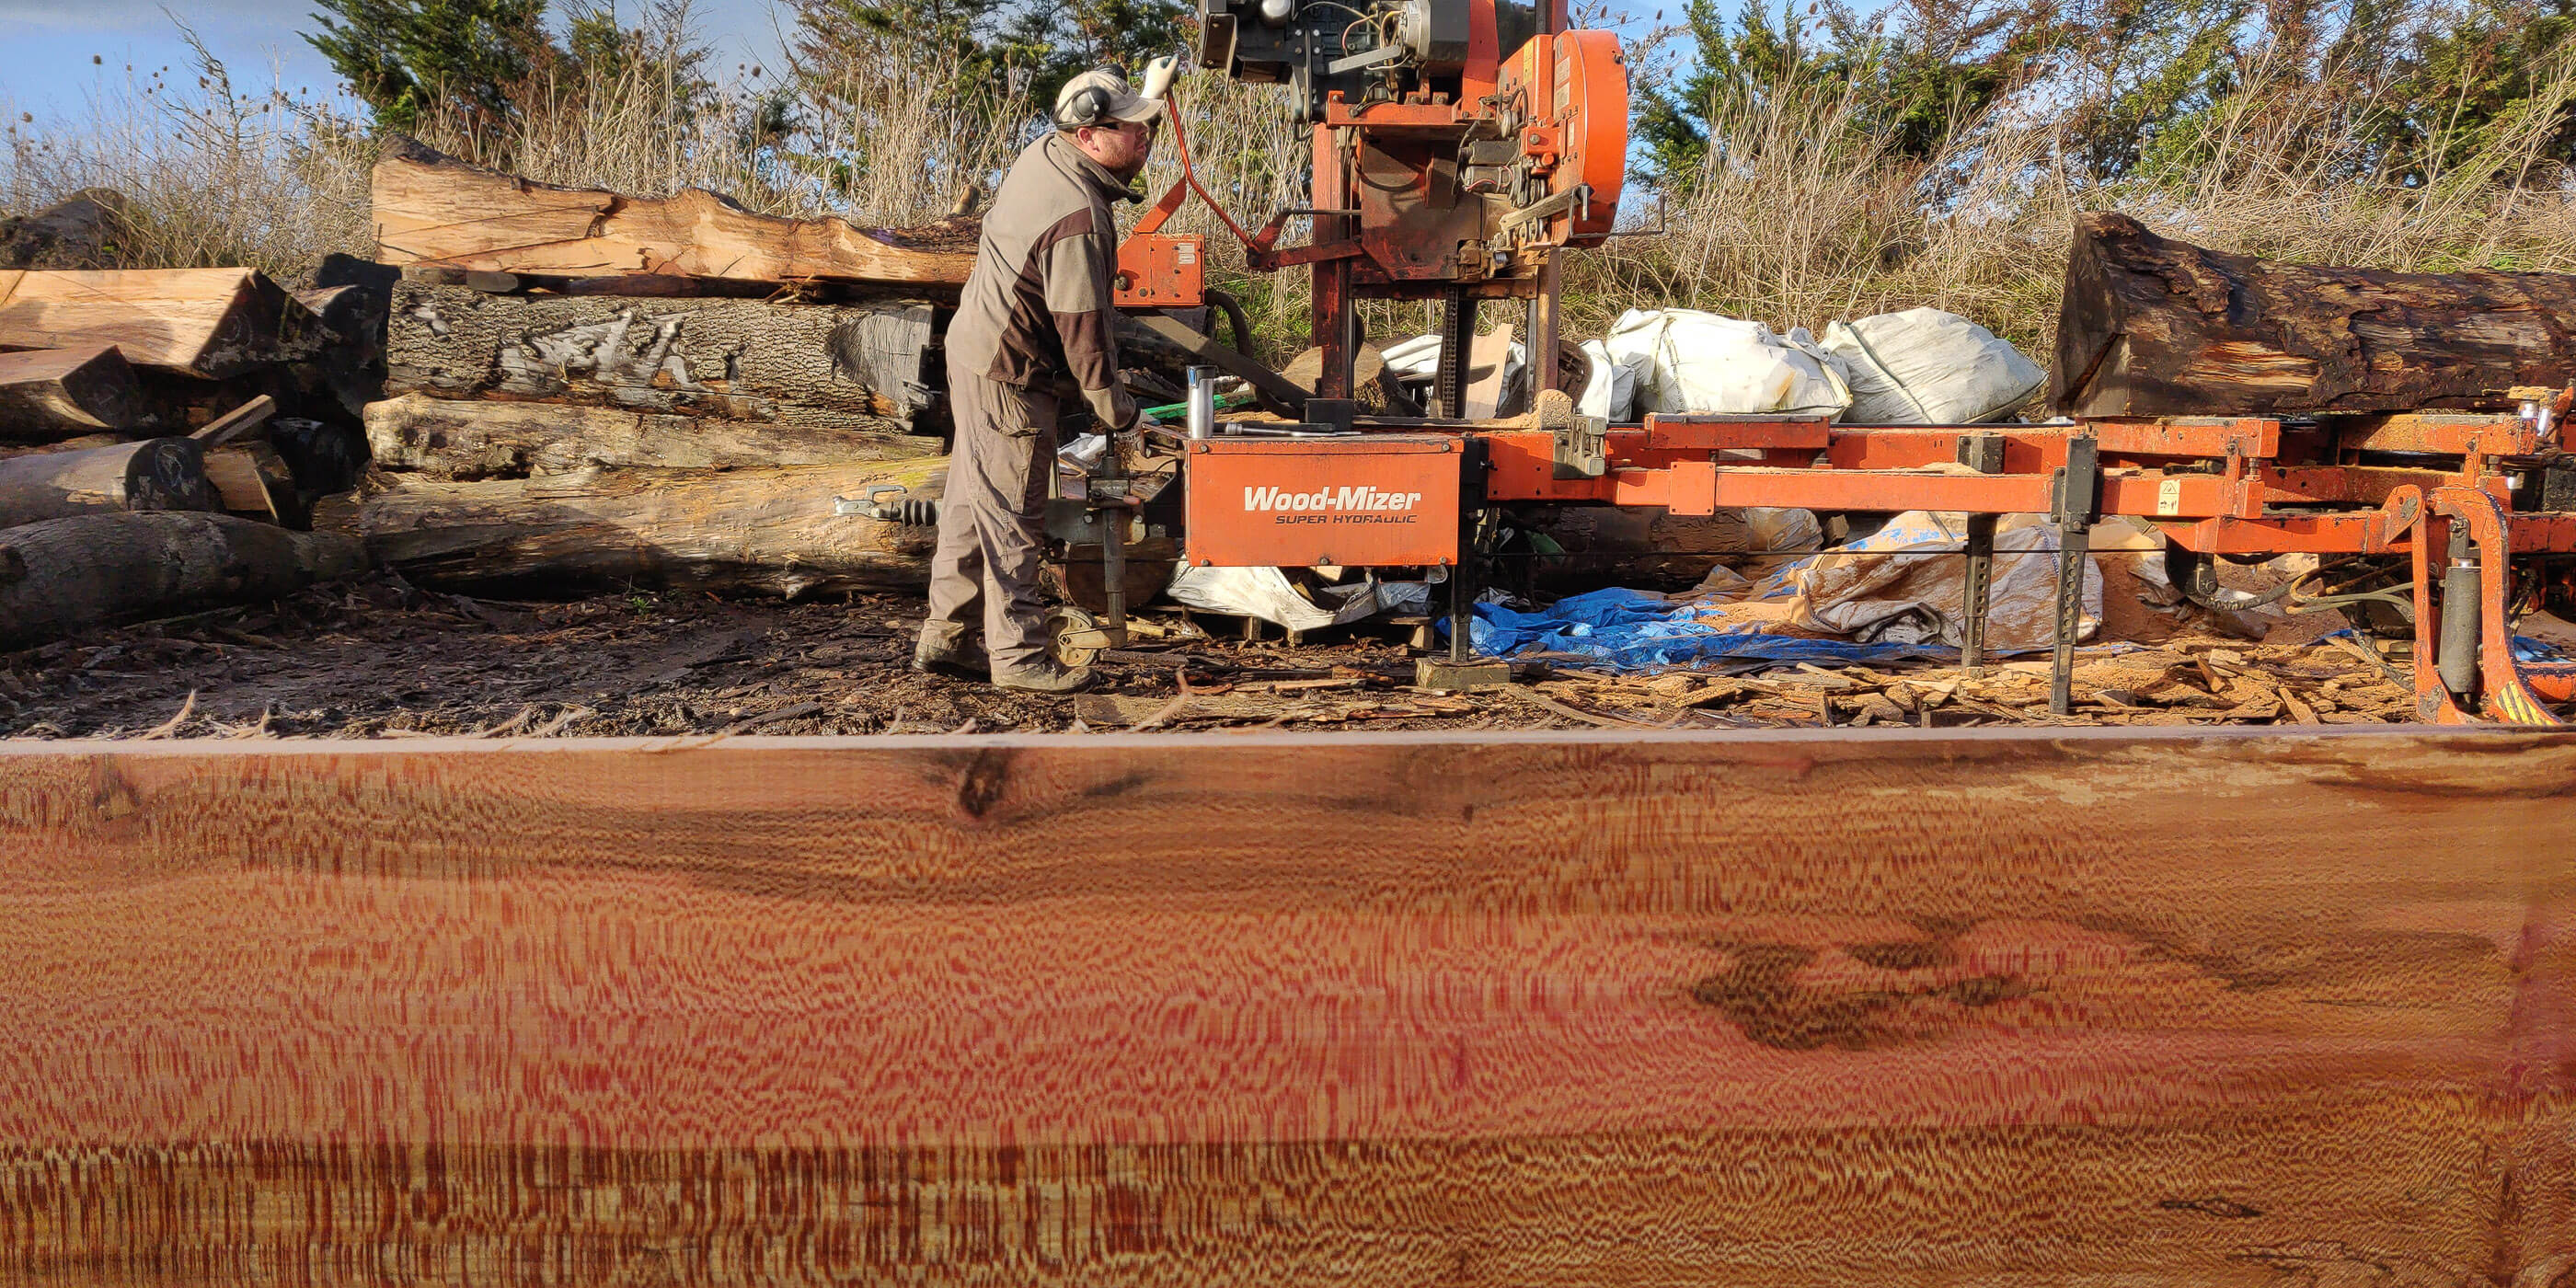 Milling London plane timber outdoors using woodmizer saw